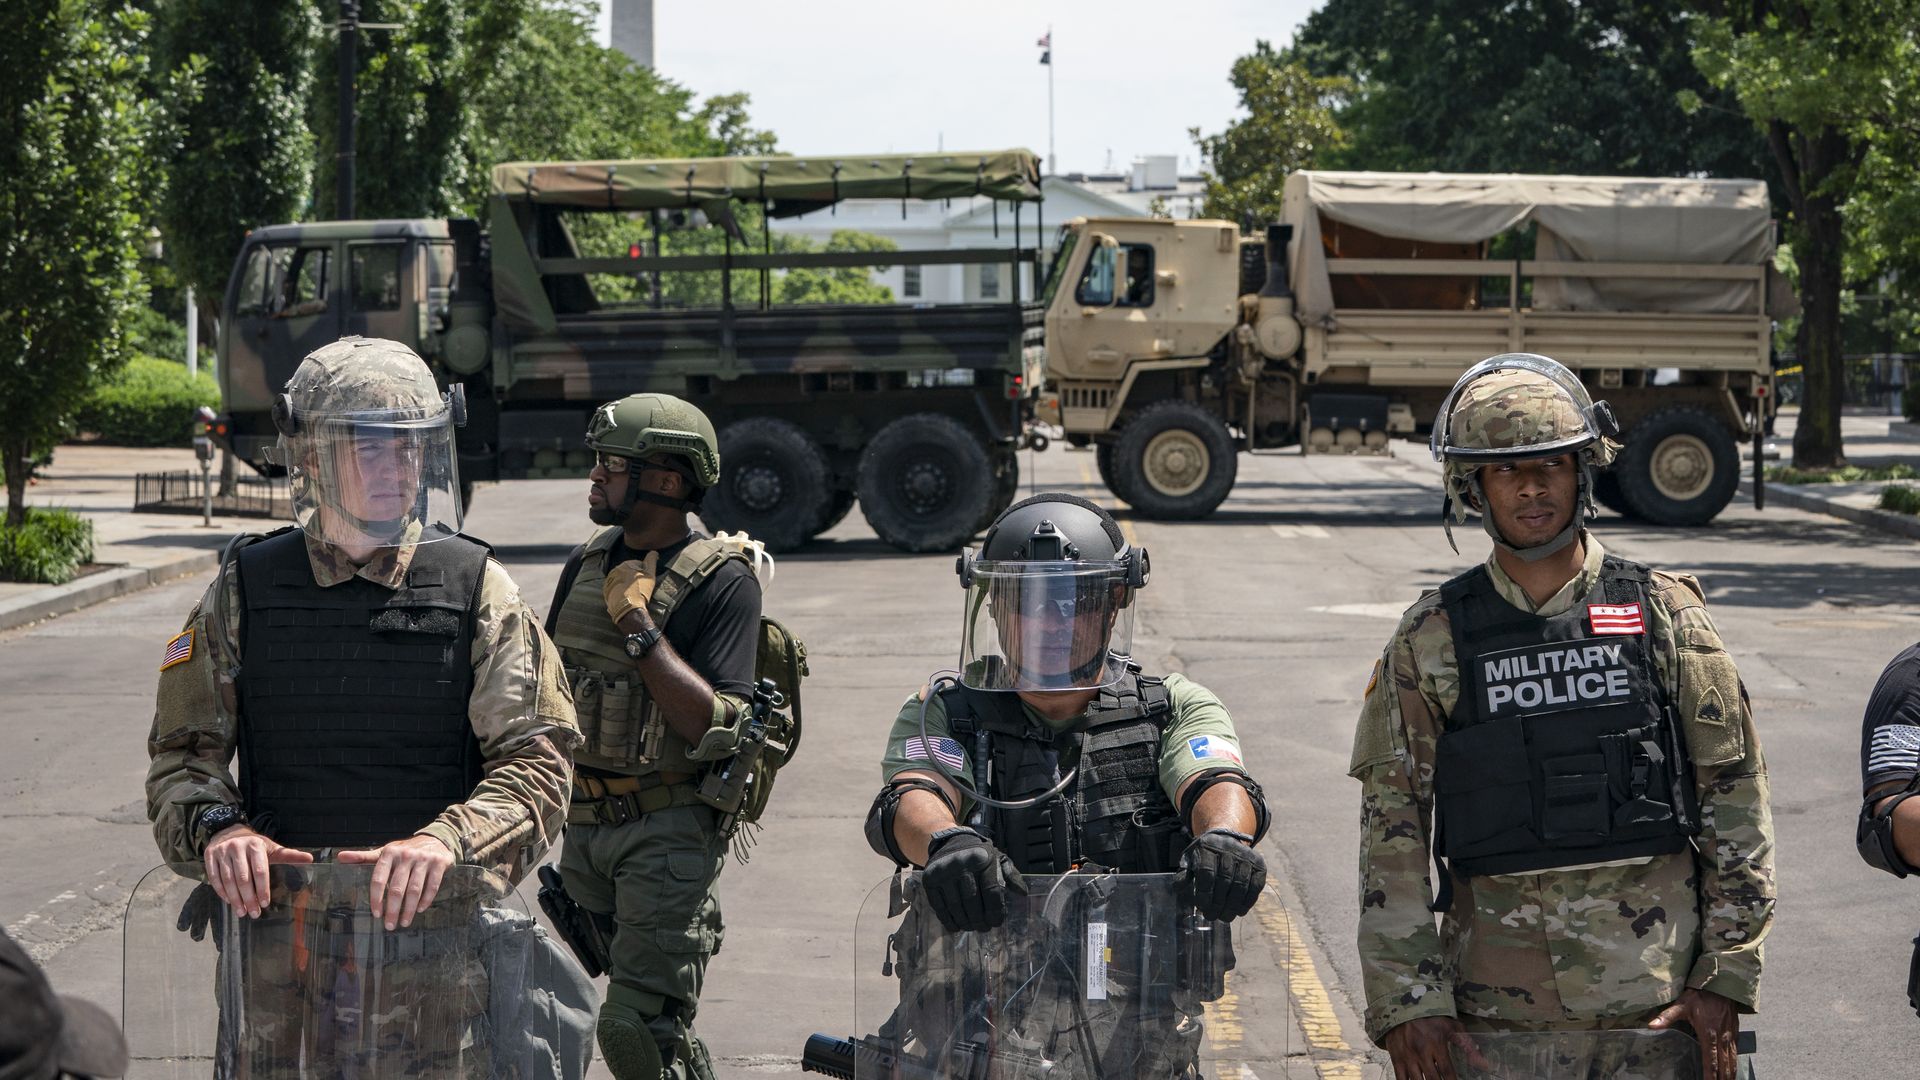 National Guard vehicles are used to block 16th Street near Lafayette Park and the White House